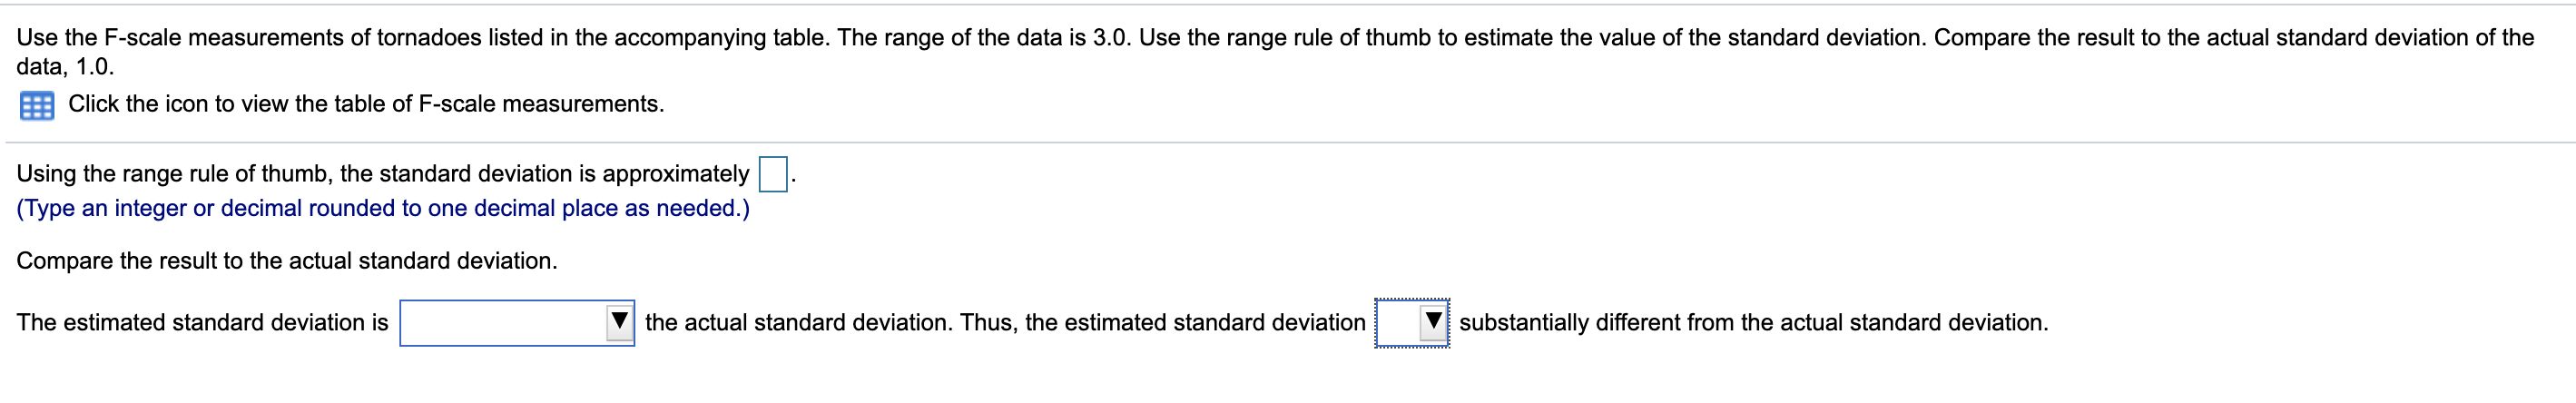 Use the F-scale measurements of tornadoes listed in the accompanying table. The range of the data is 3.0. Use the range rule of thumb to estimate the value of the standard deviation. Compare the result to the actual standard deviation of the
data, 1.0.
Click the icon to view the table of F-scale measurements.
Using the range rule of thumb, the standard deviation is approximately
(Type an integer or decimal rounded to one decimal place as needed.)
Compare the result to the actual standard deviation.
substantially different from the actual standard deviation.
The estimated standard deviation is
the actual standard deviation. Thus, the estimated standard deviation
